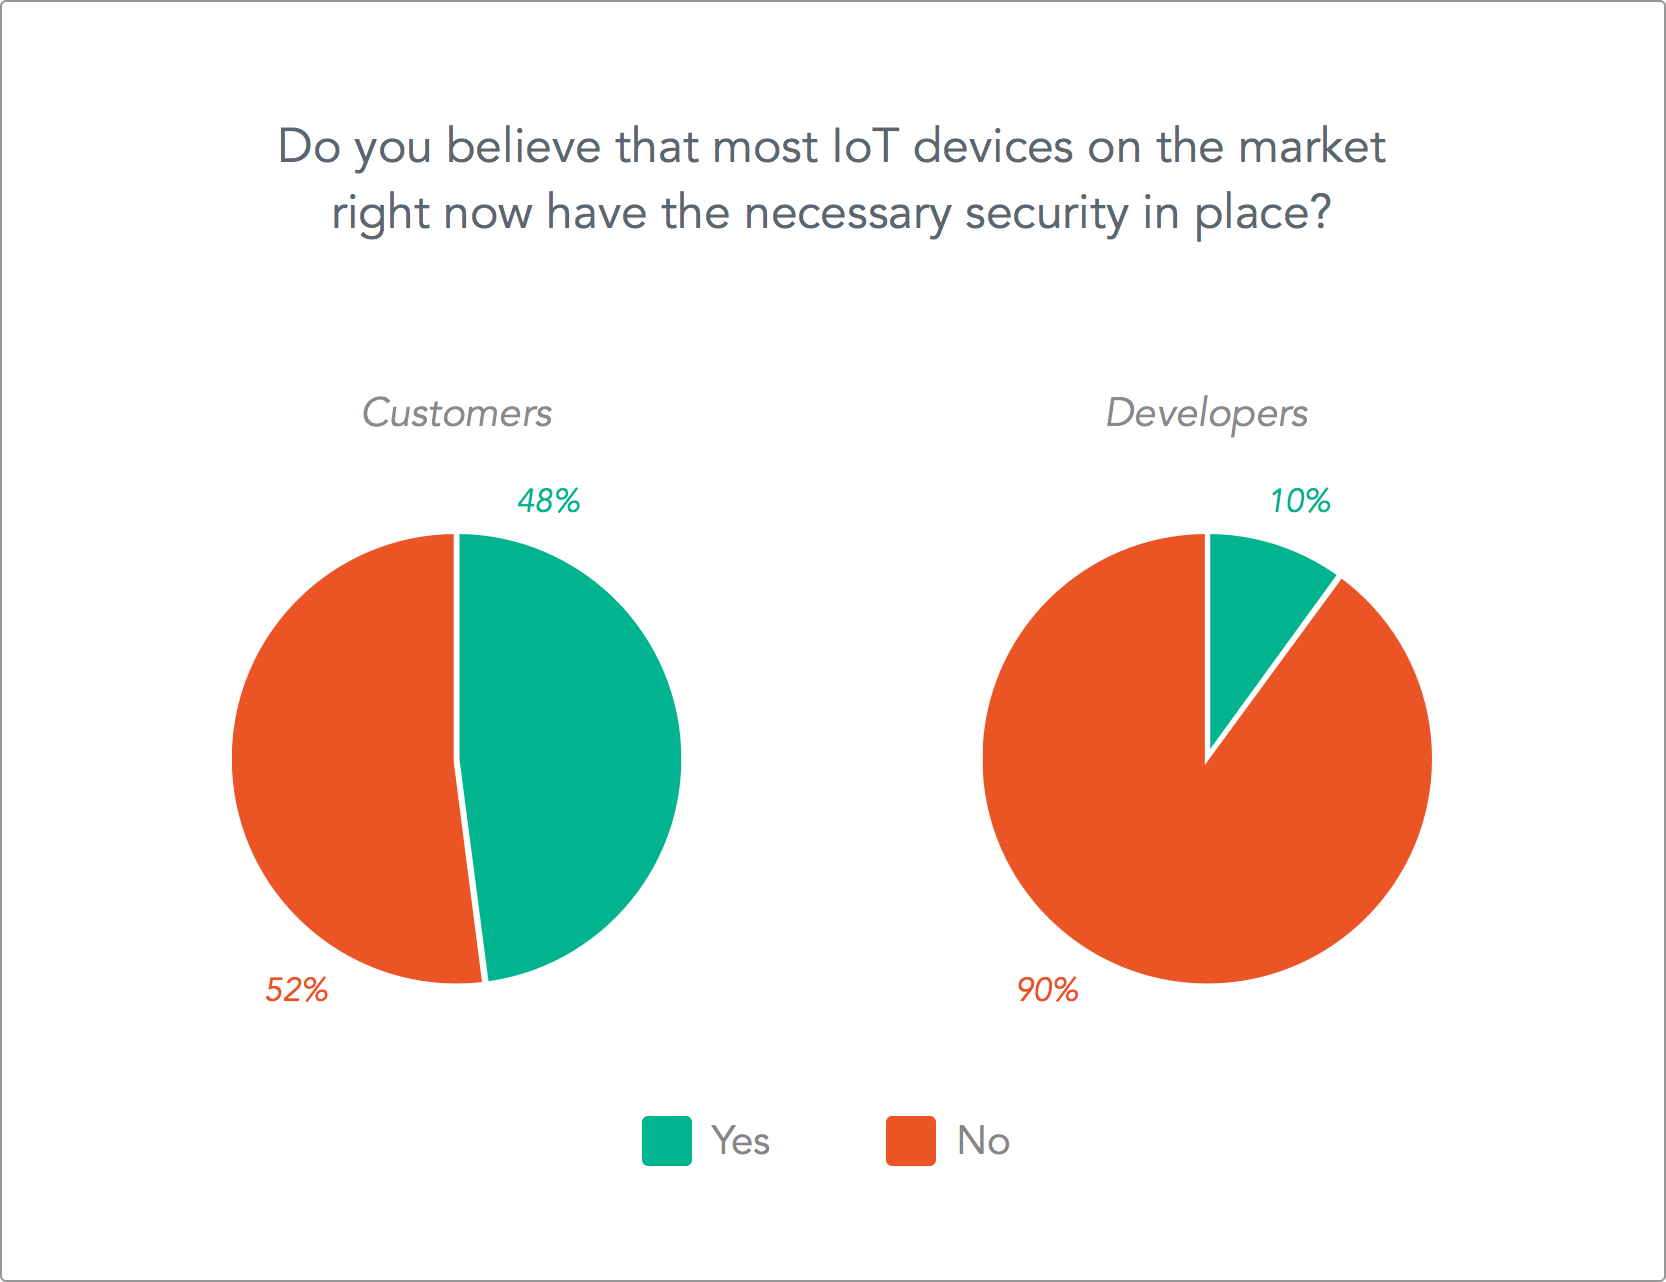 Do you believe that IoT devices are secure?